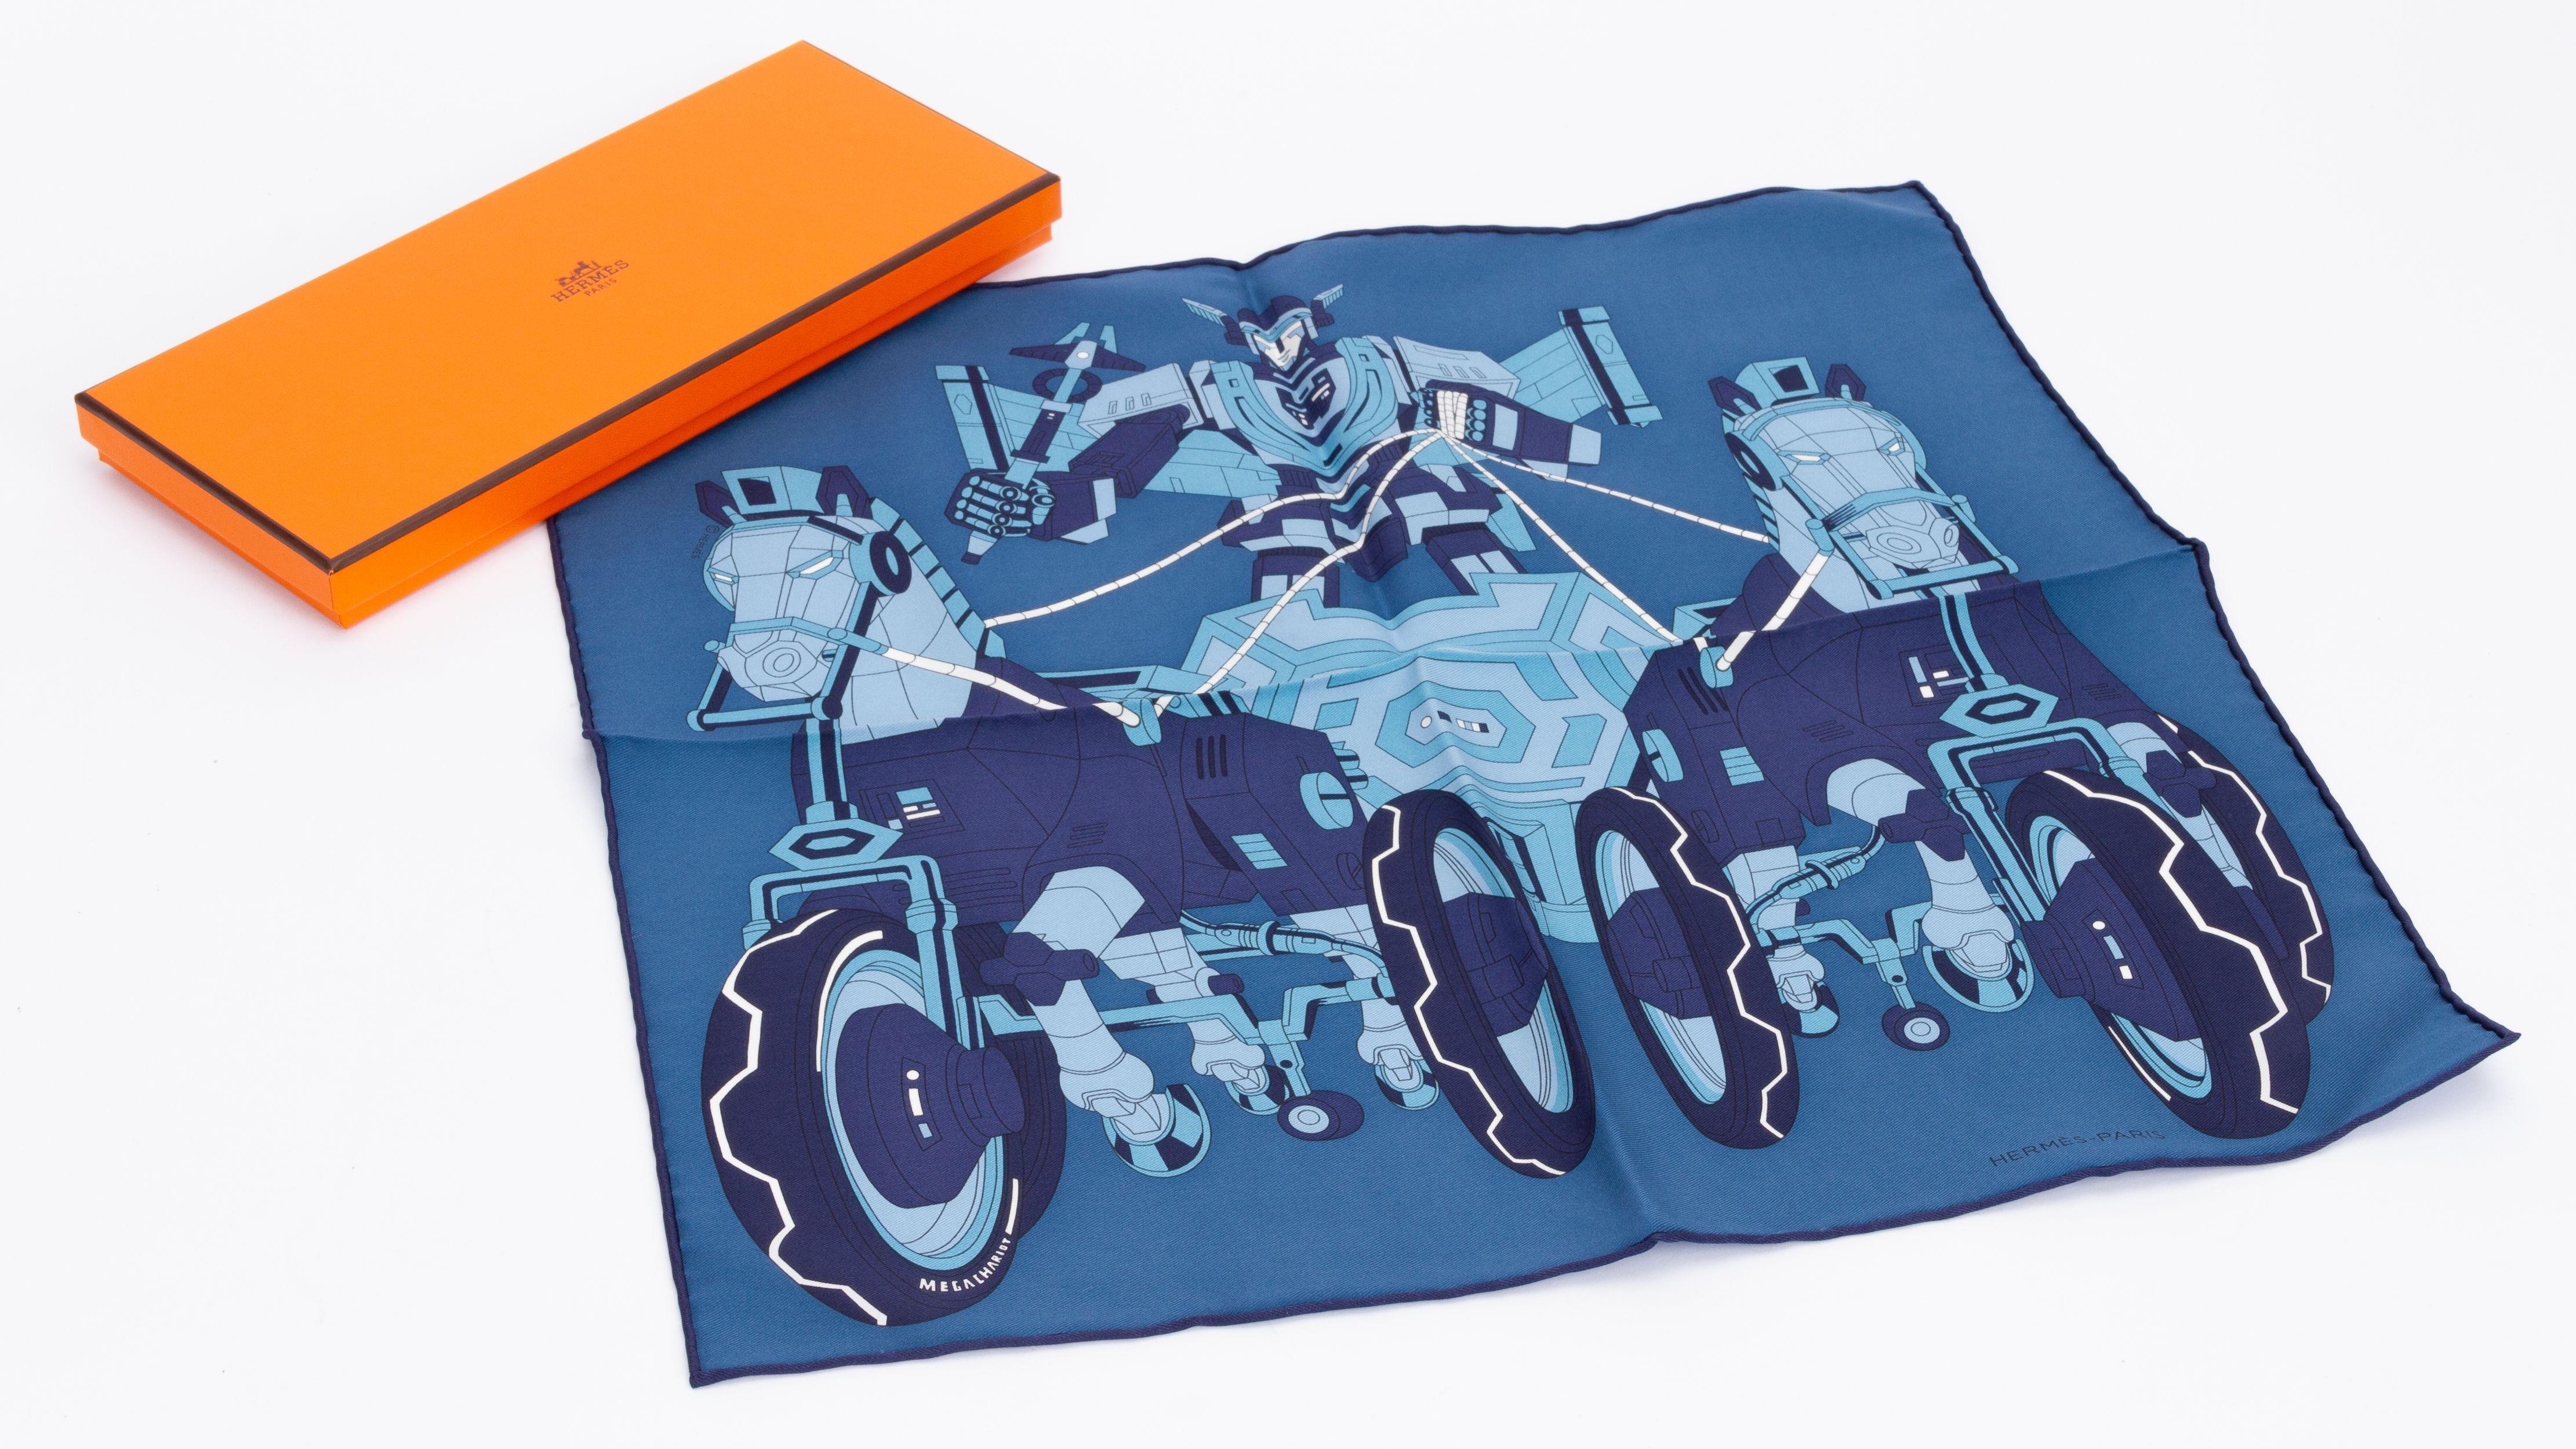 Hermès Mega Chariot by Daisuke Nomura Scarf. Nomura was inspired by a children's horse tricycle from the Emile Hermes collection. He shows the god Hermes who is said to have taken Apollo's chariot without permission. Transformed into a robot, the